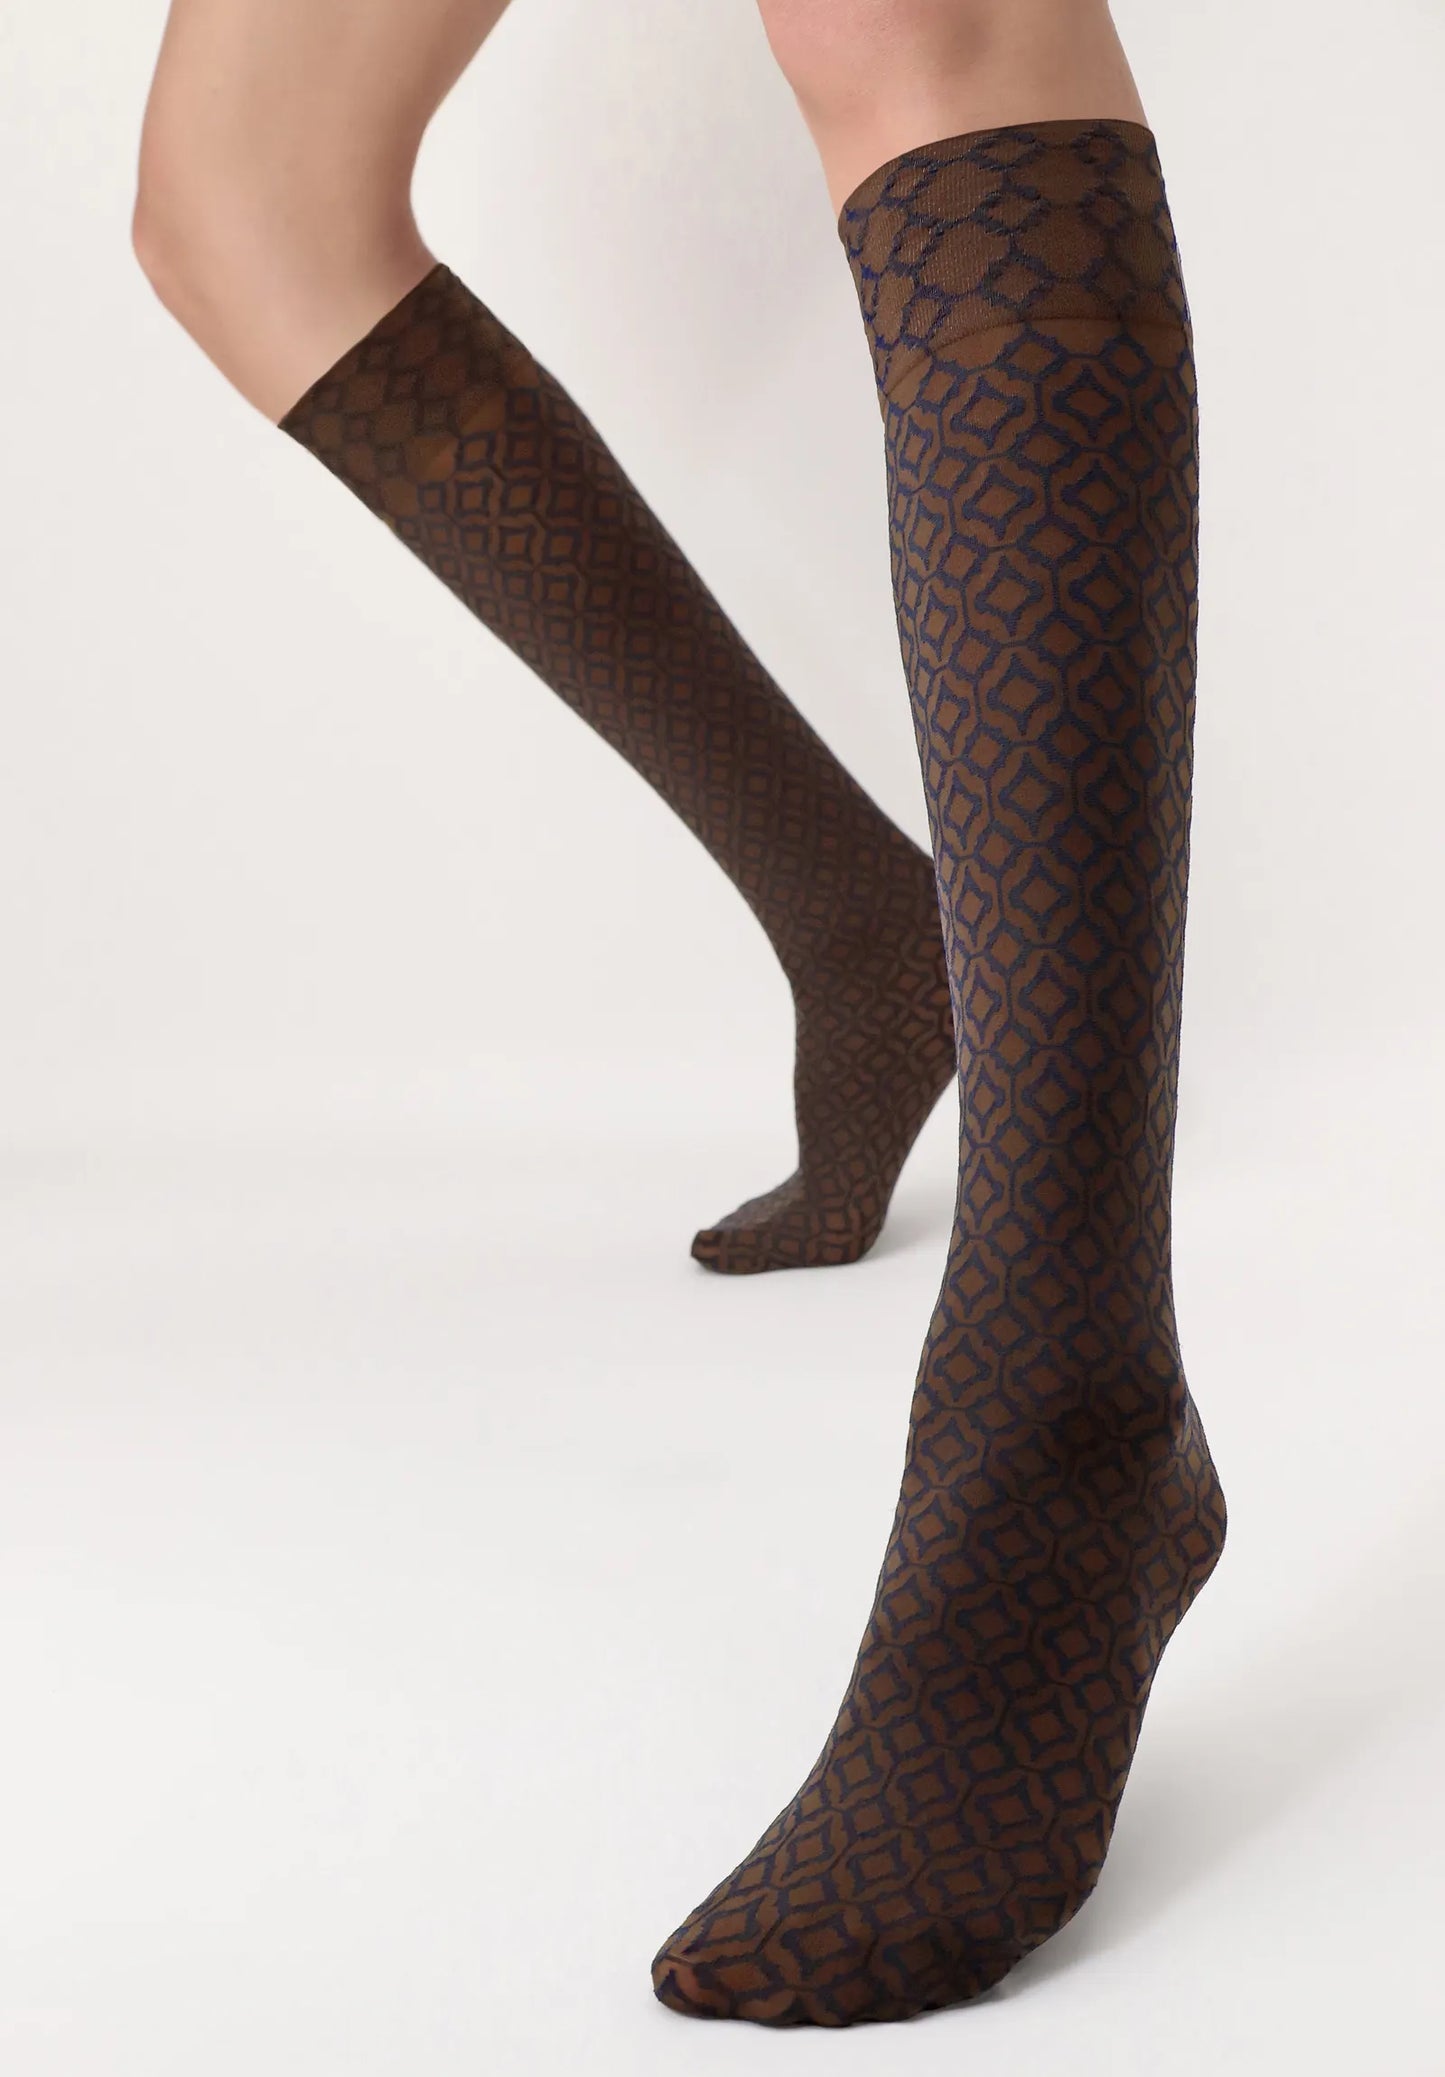 Oroblù I Love First Class Geomtric Knee-Highs - Brown opaque fashion knee-high socks with a subtle geometric diamond style pattern in navy